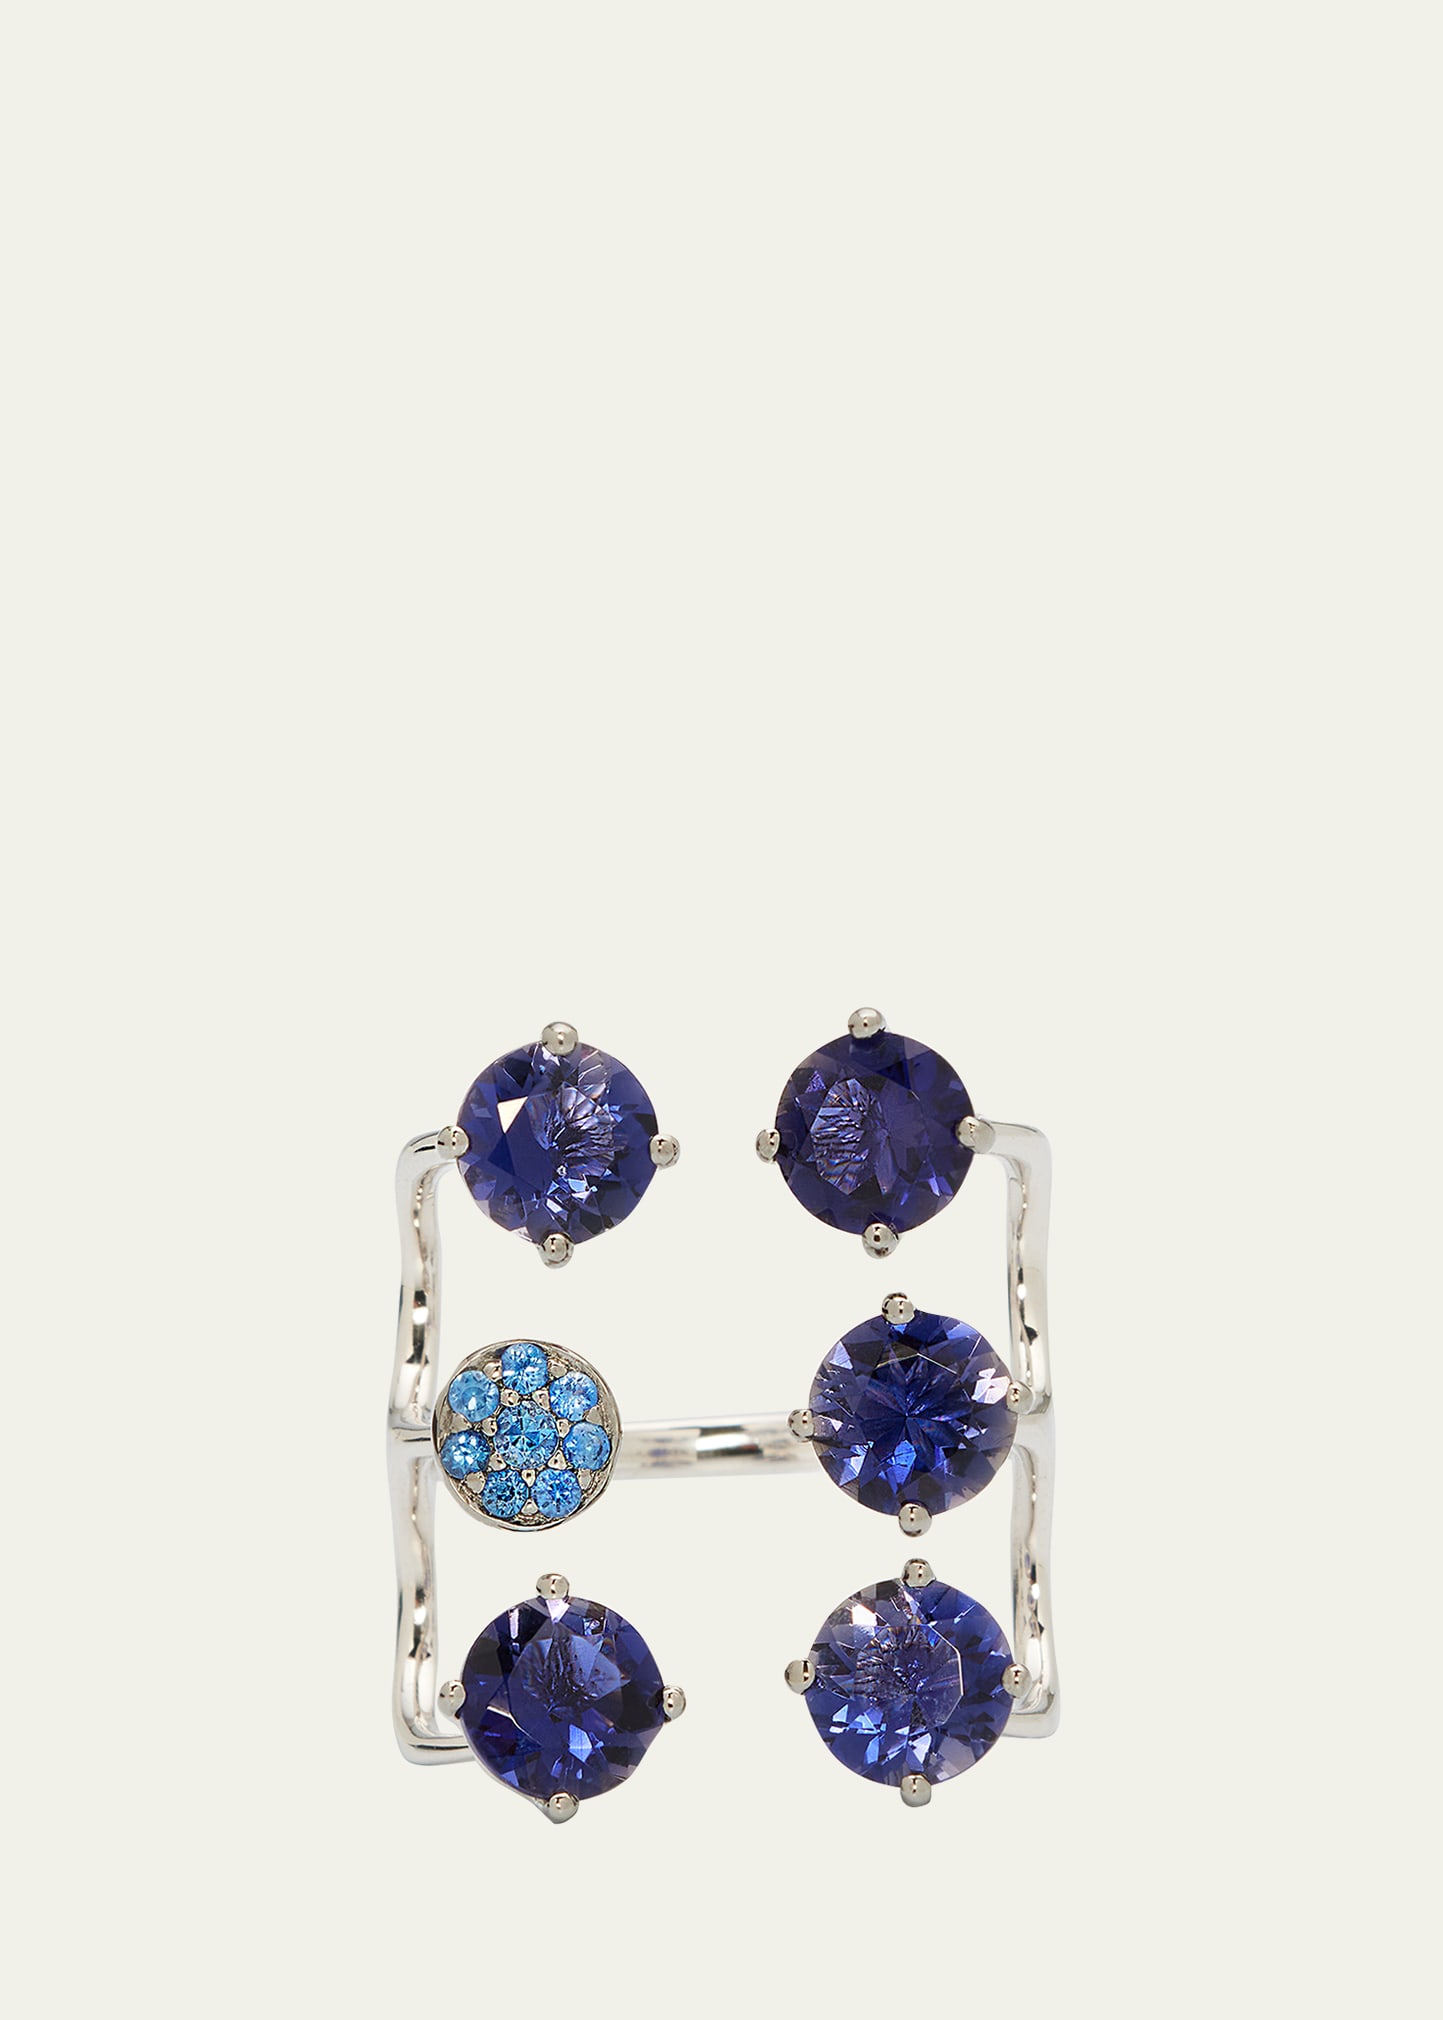 White Gold Blue Sapphire and Iolite Ring from The Aurore Collection